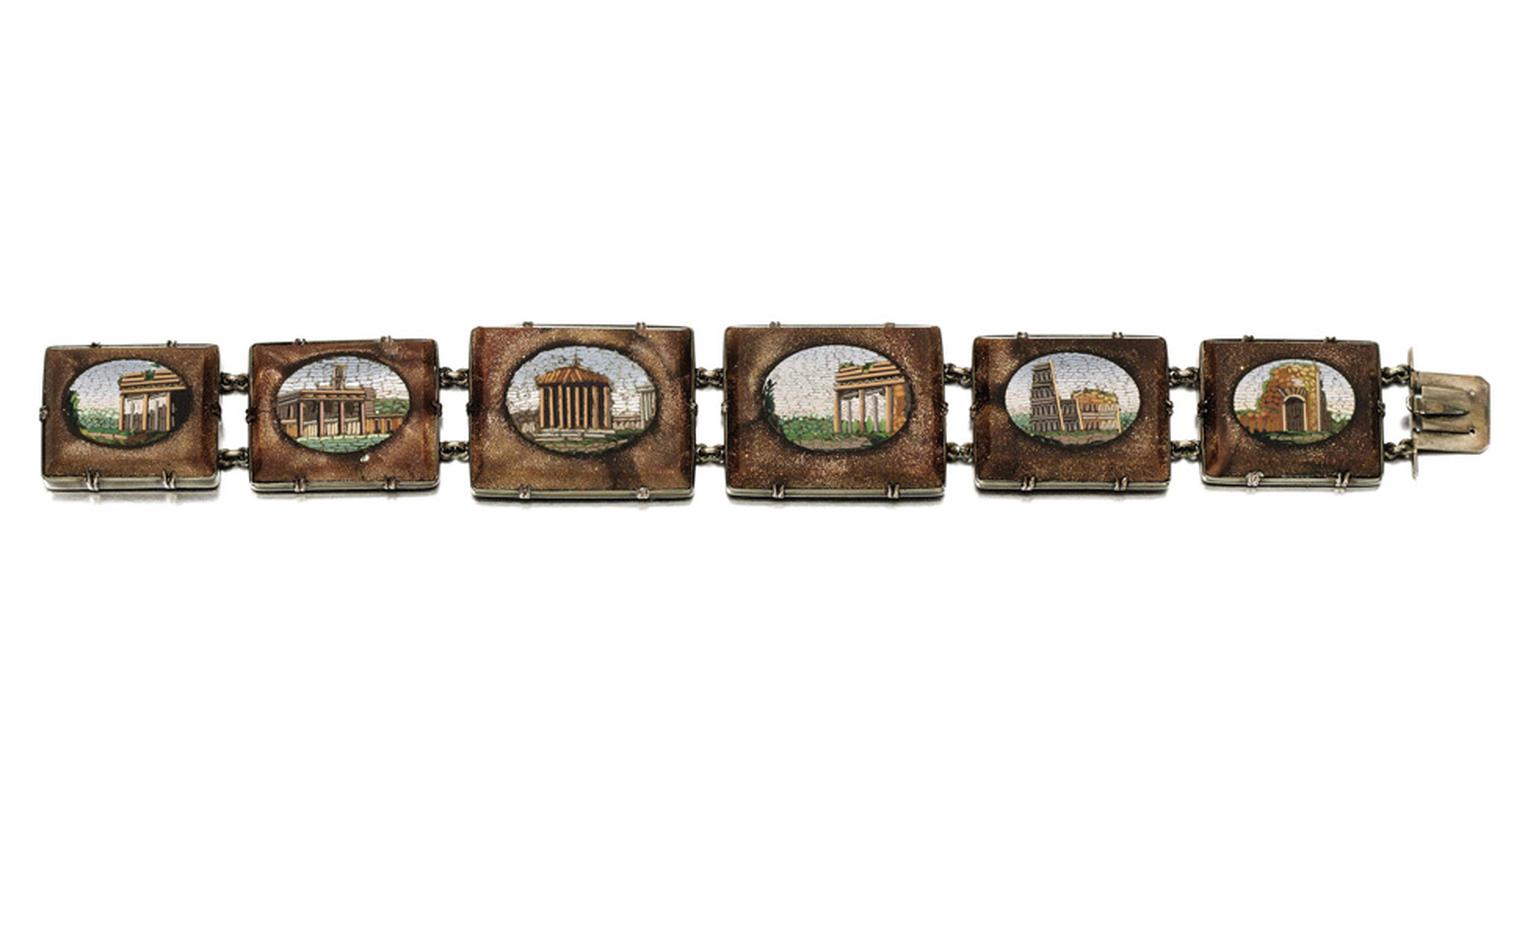 Lot 21. Gold and micromosaic bracelet, mid 19th Century. Estimate £3,000-£5,000